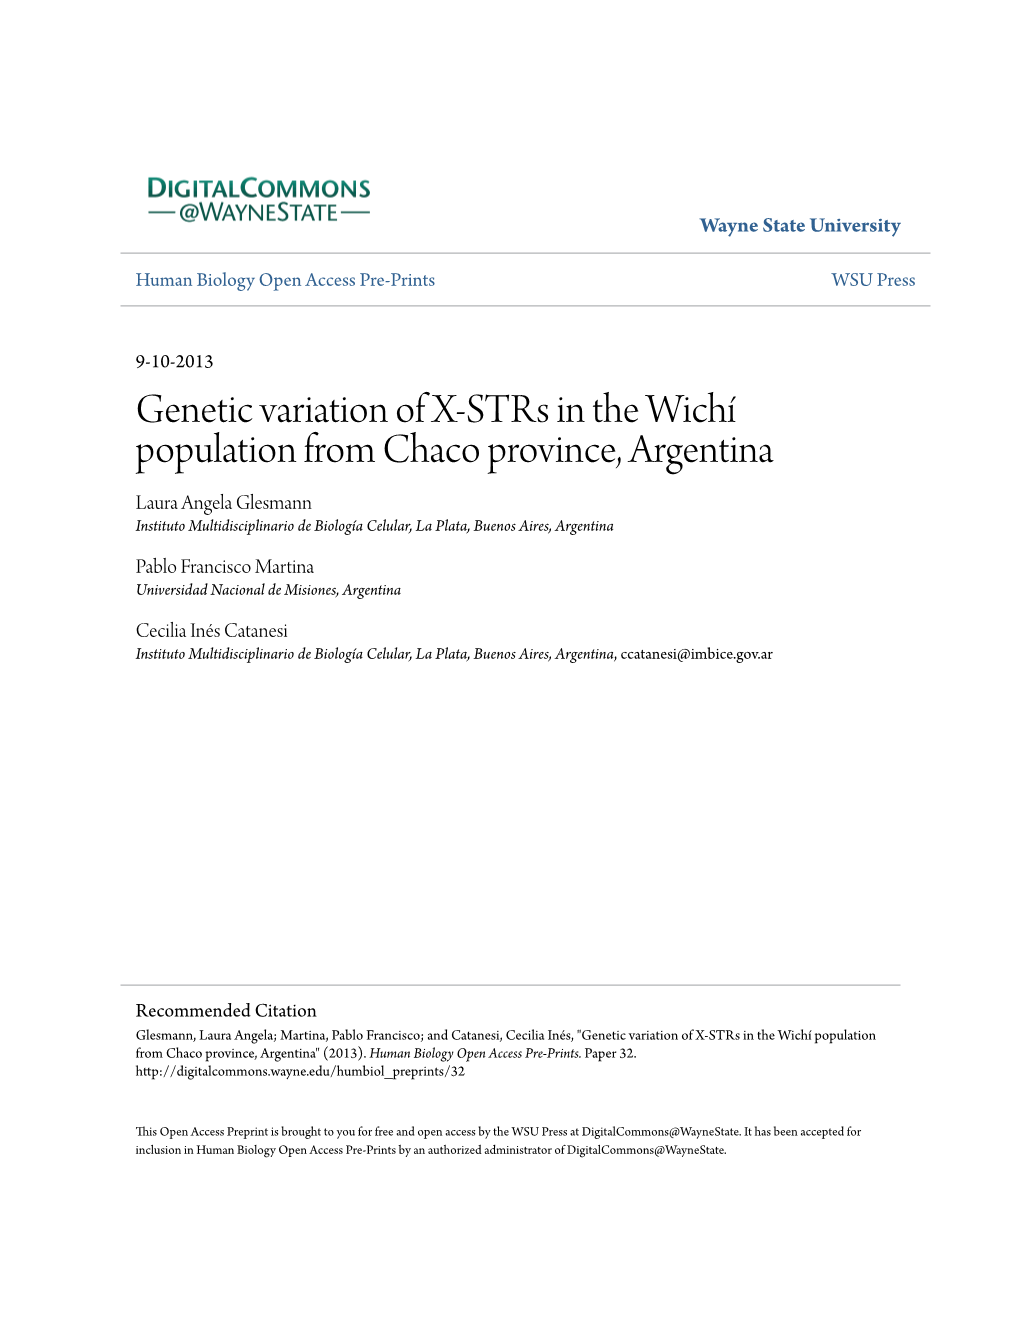 Genetic Variation of X-Strs in the Wichí Population from Chaco